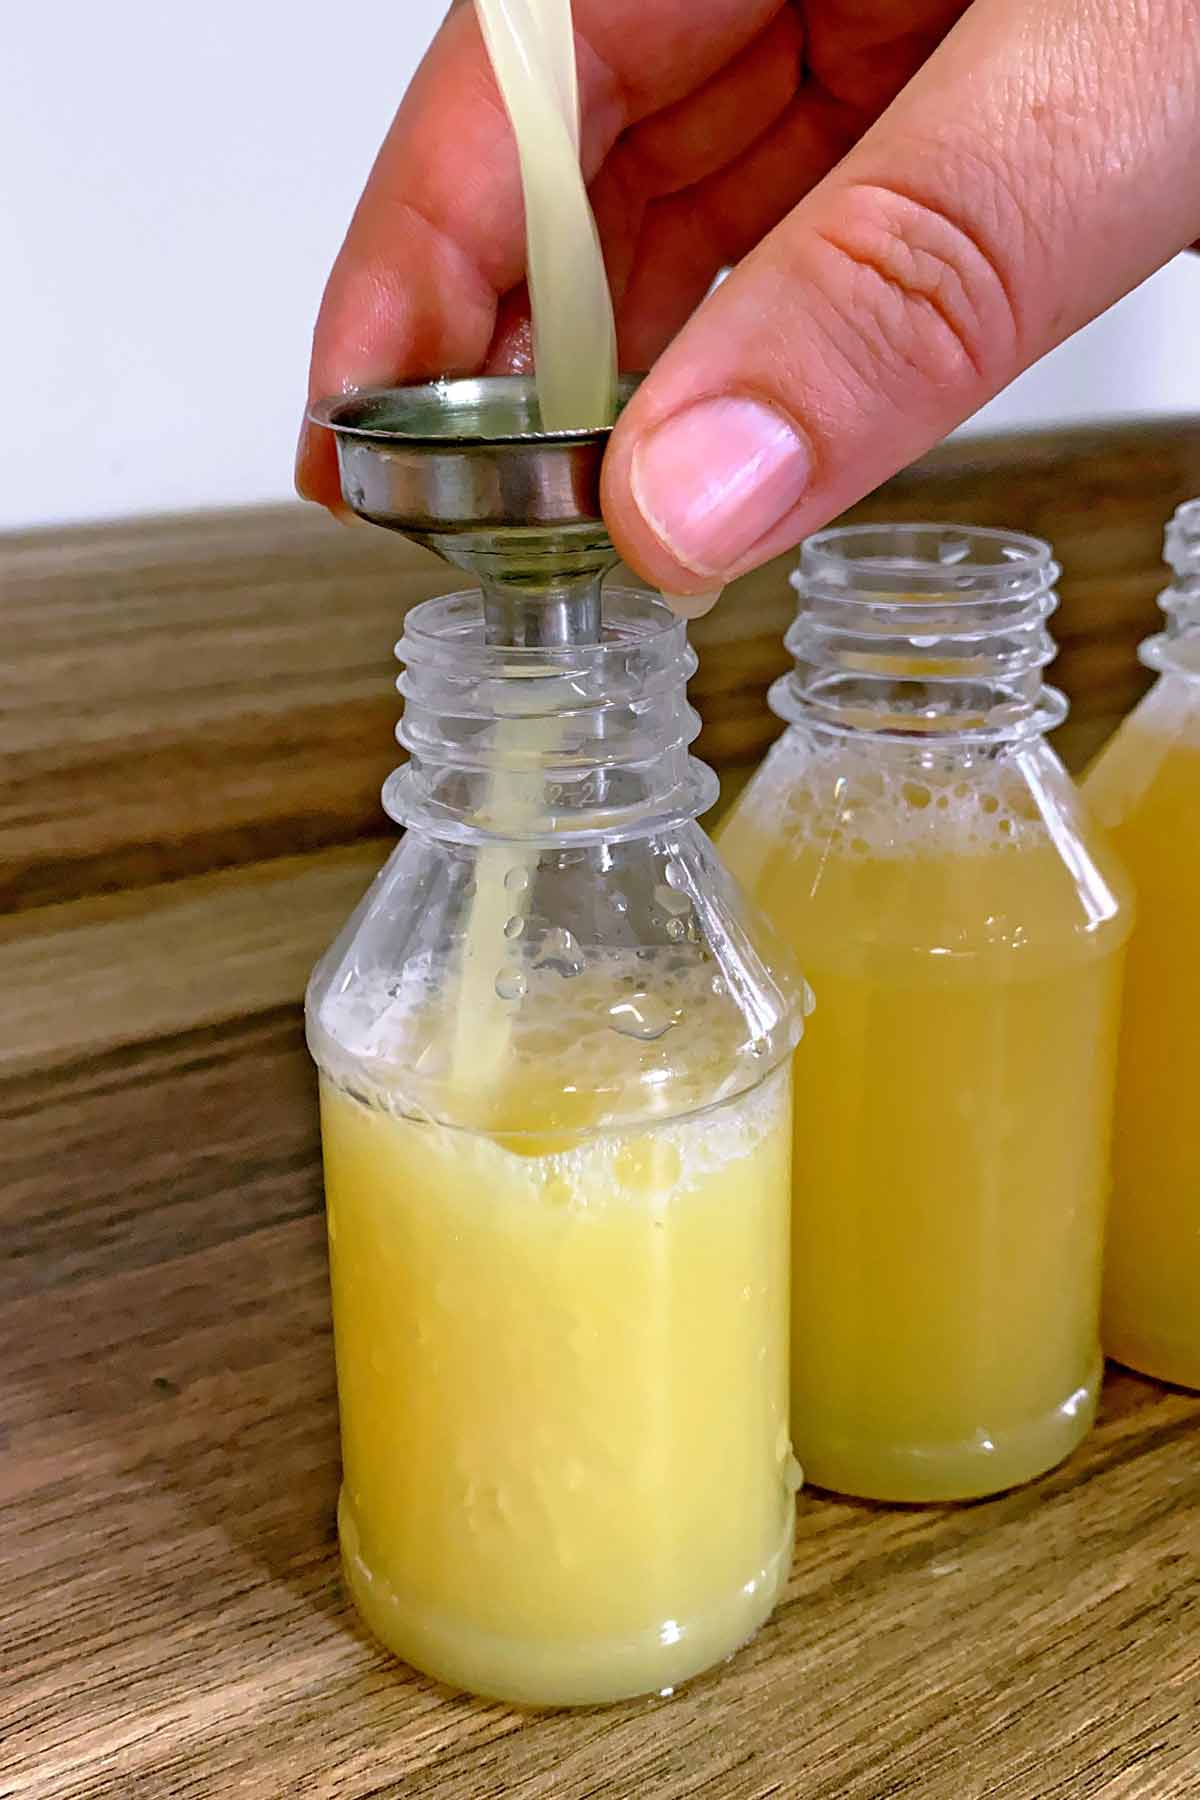 Juice being poured into small bottles.